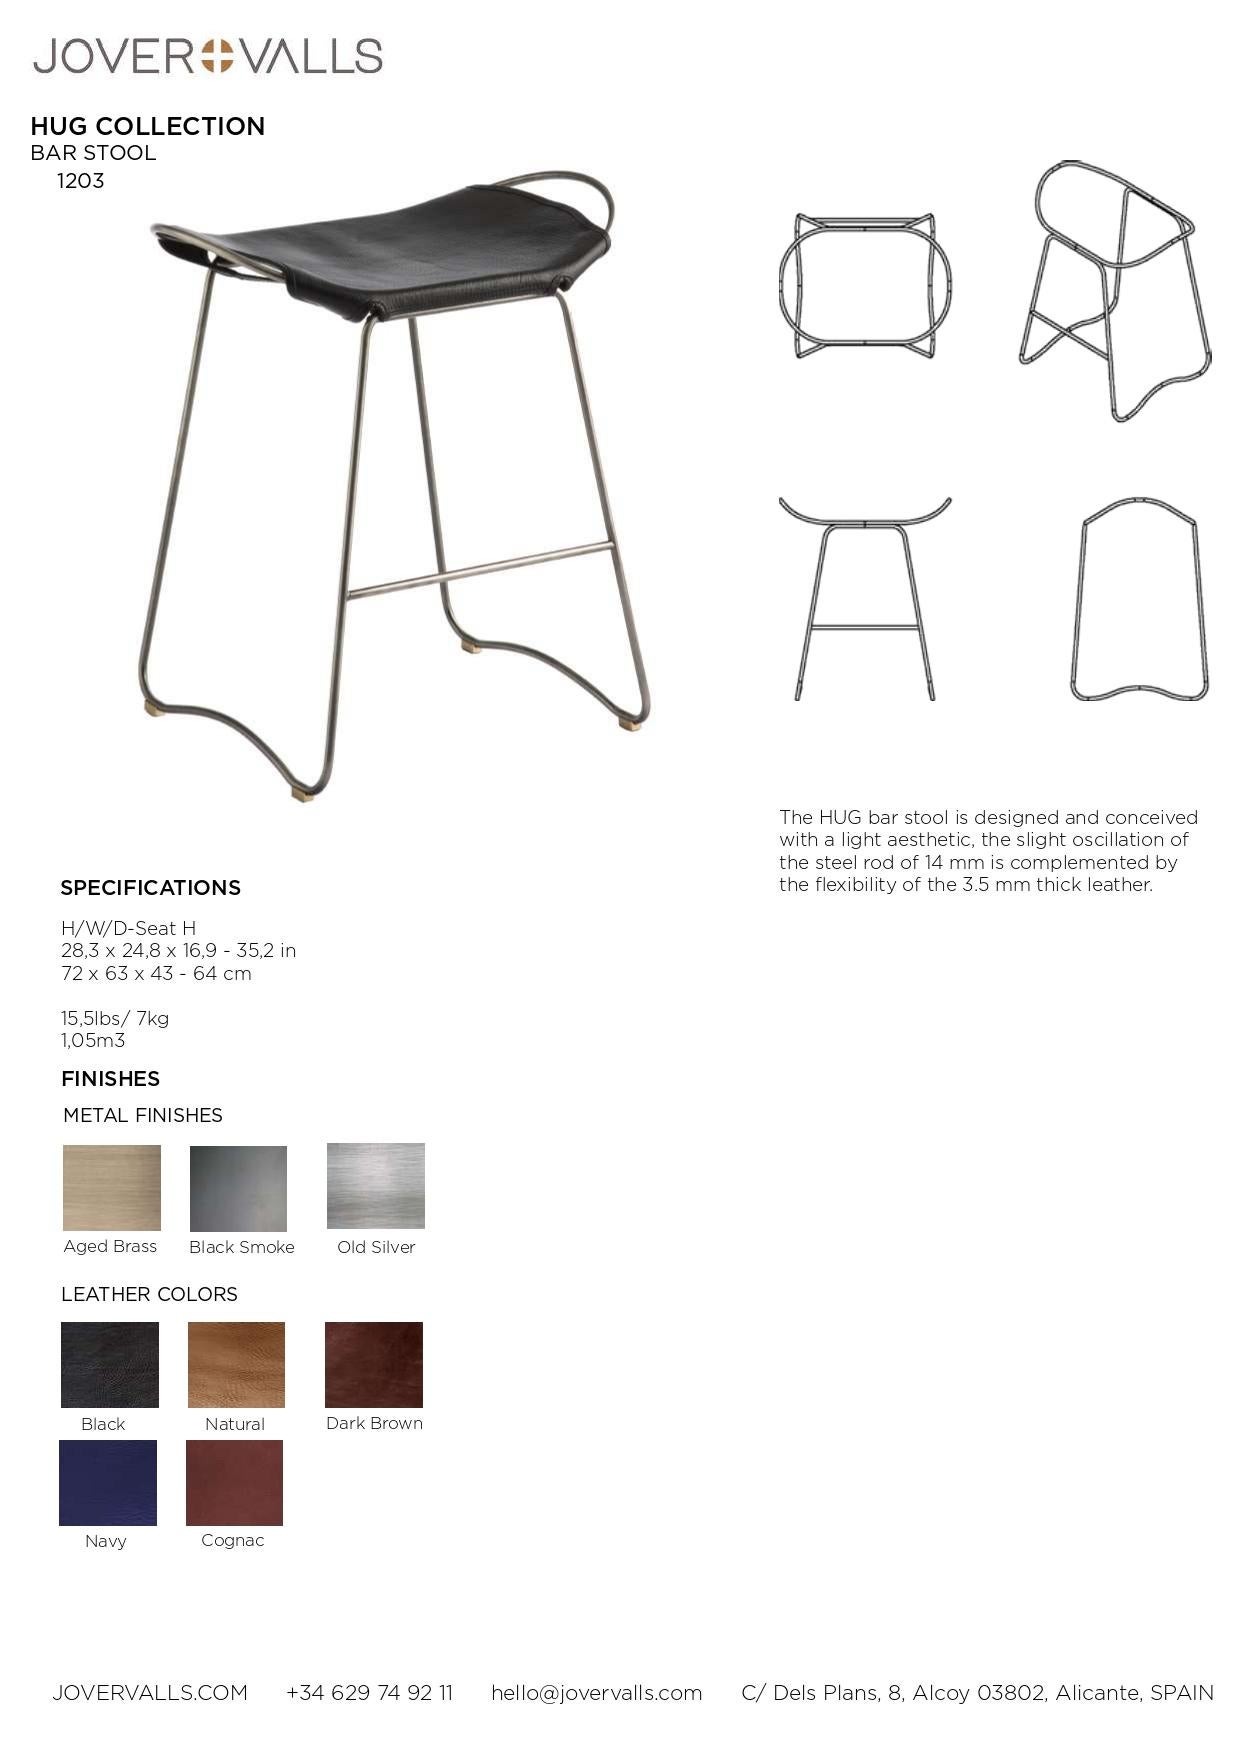 Steel Sculptural Organic Contemporary Bar Stool Old Silver & Black Leather  Sample For Sale